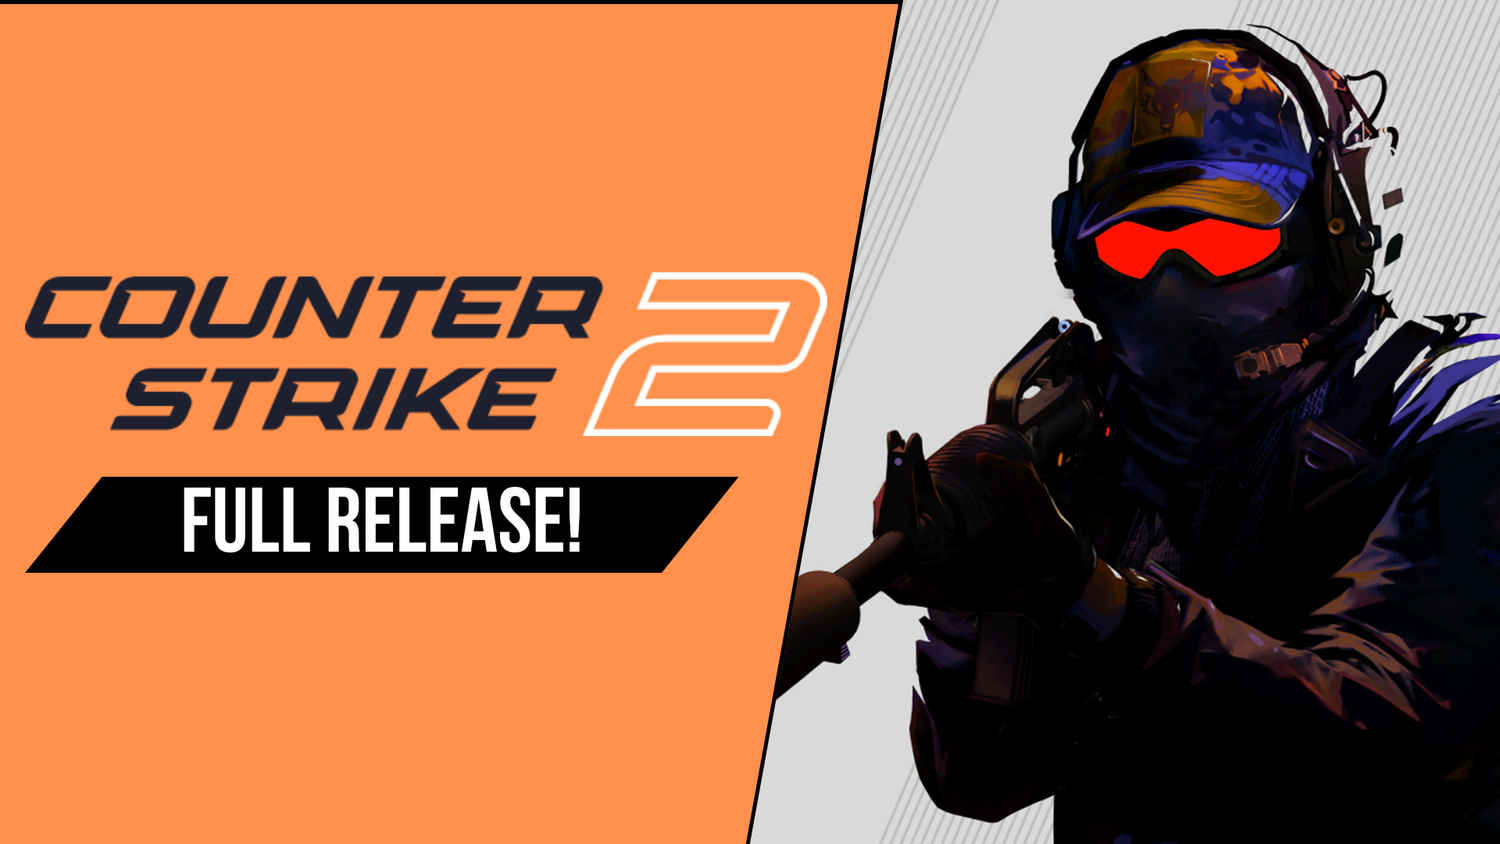 How to play Counter-Strike 2 limited test beta - complete guide